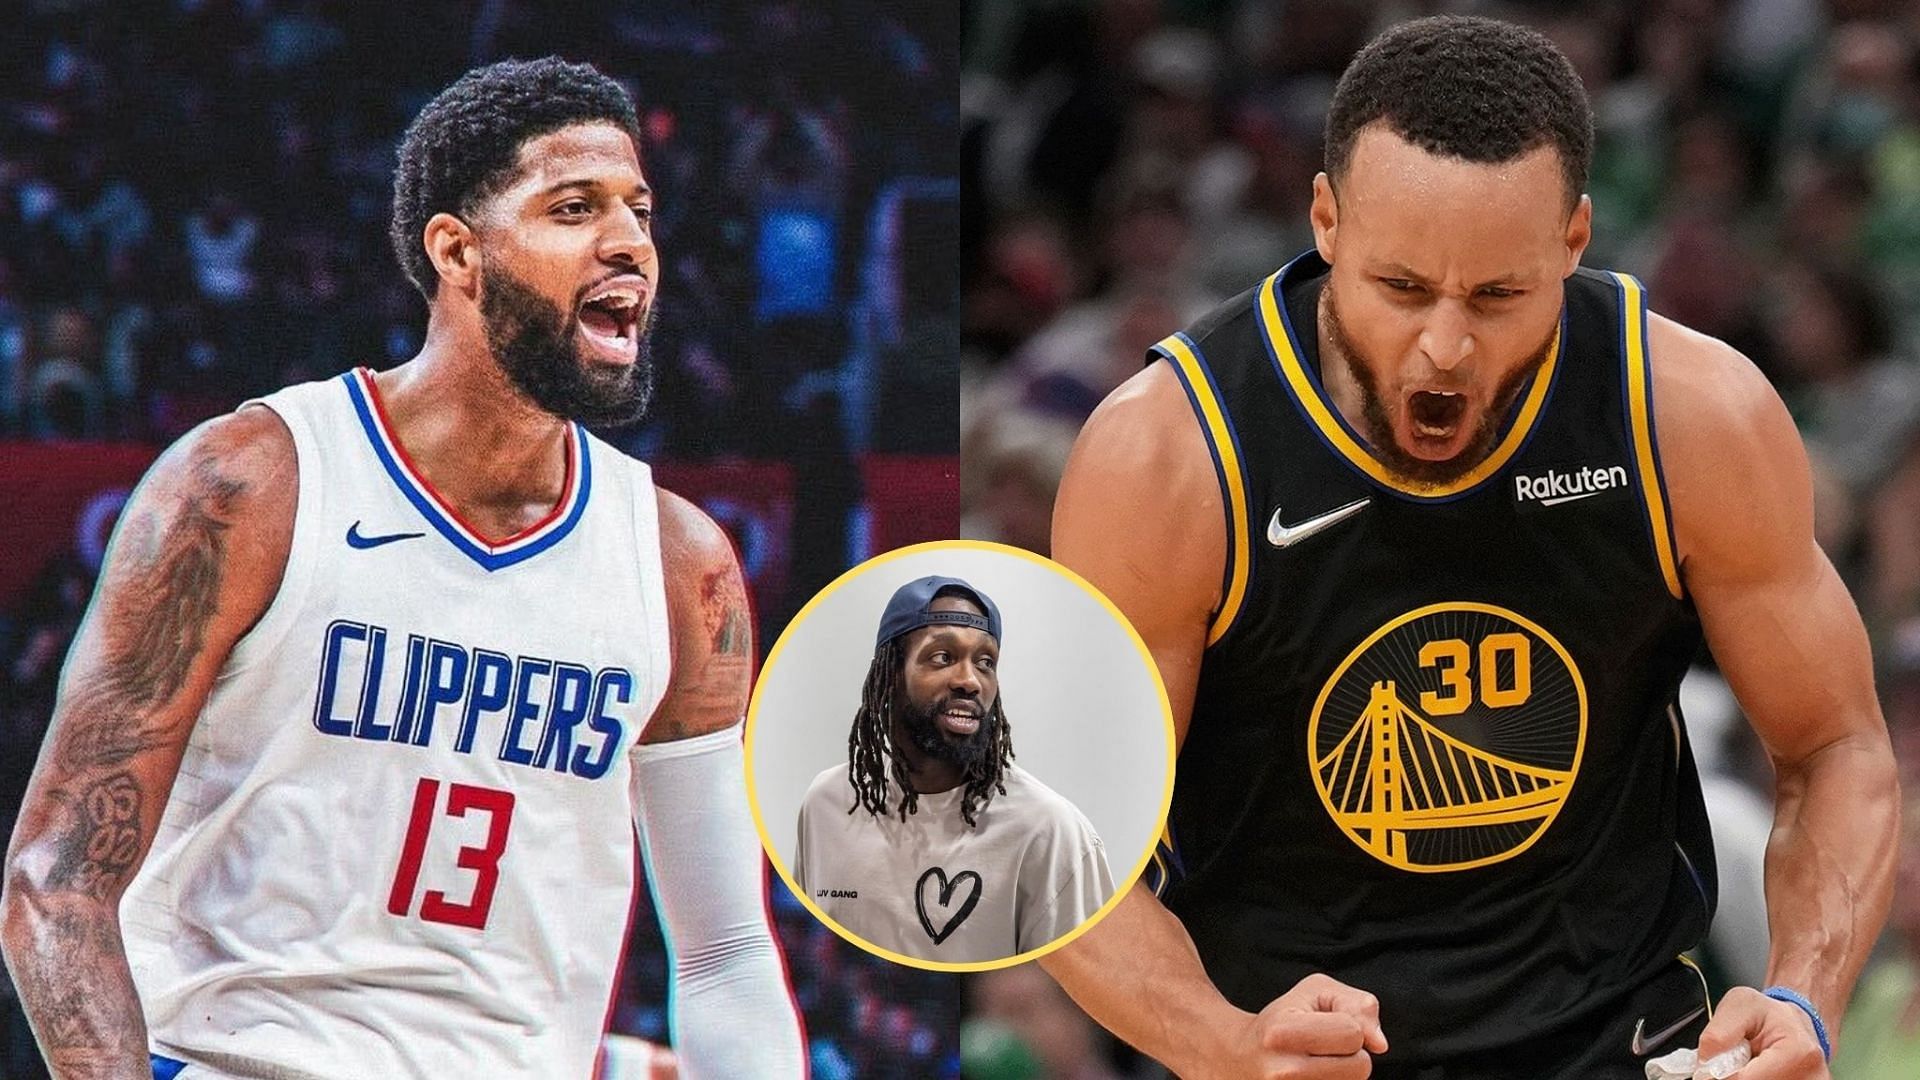 Patrick Beverley is interested in a possible Paul George-Steph Curry tandem in Golden State (Photos from IG accounts of Clippers, Warriors and Beverley)